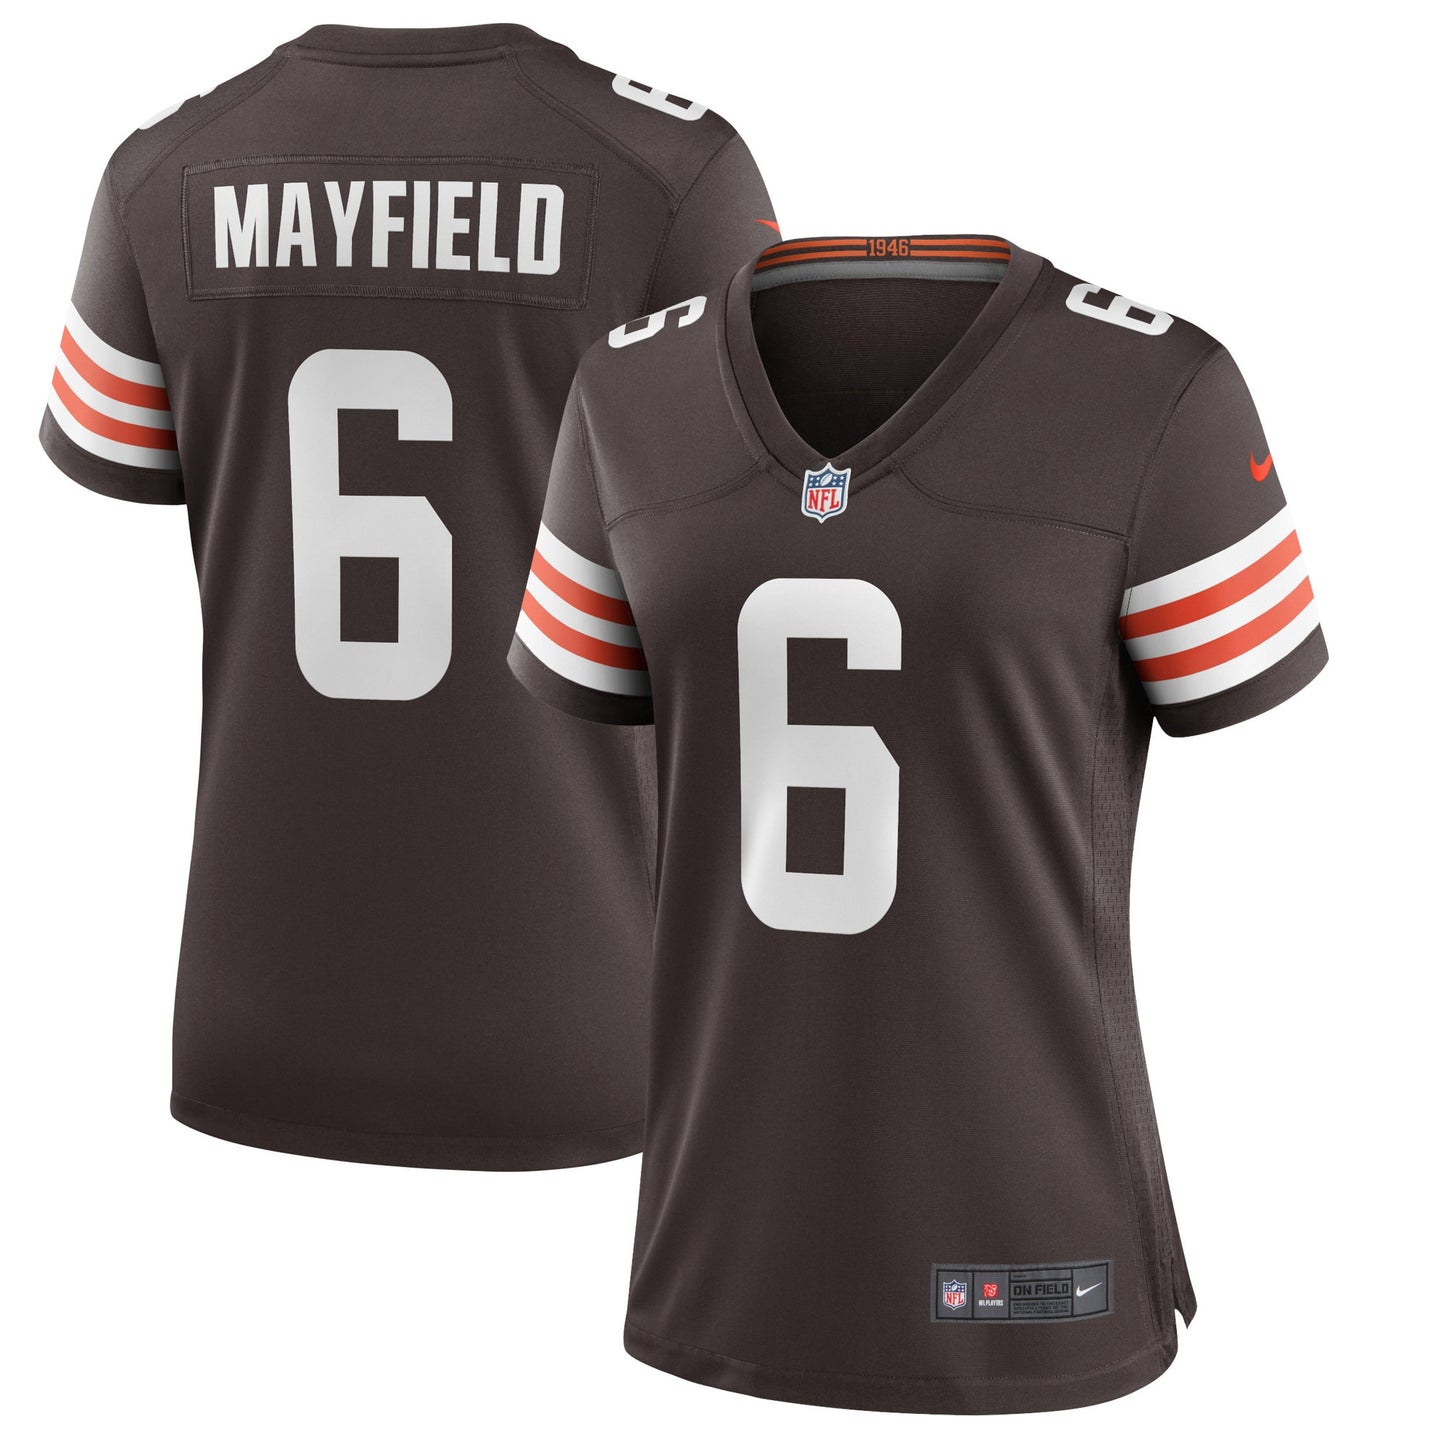 Baker Mayfield Cleveland Browns Nike Women's Game Player Jersey - Brown